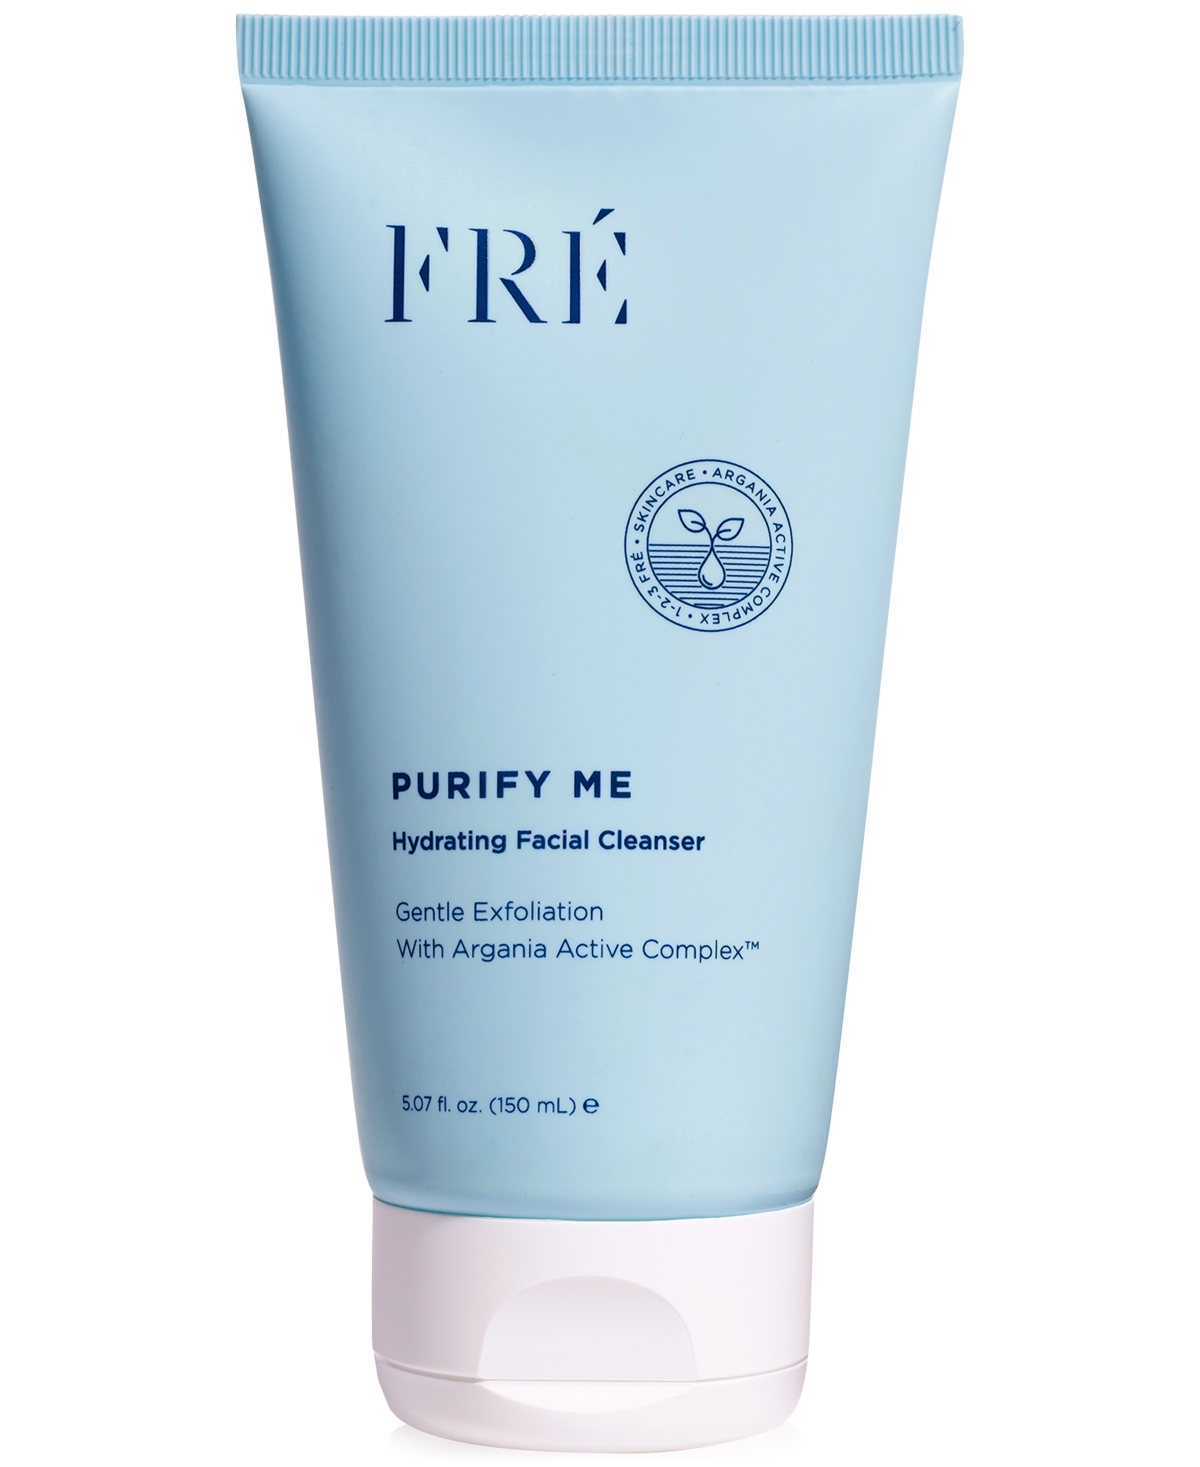 Purify Me Hydrating Facial Cleanser, 5oz.